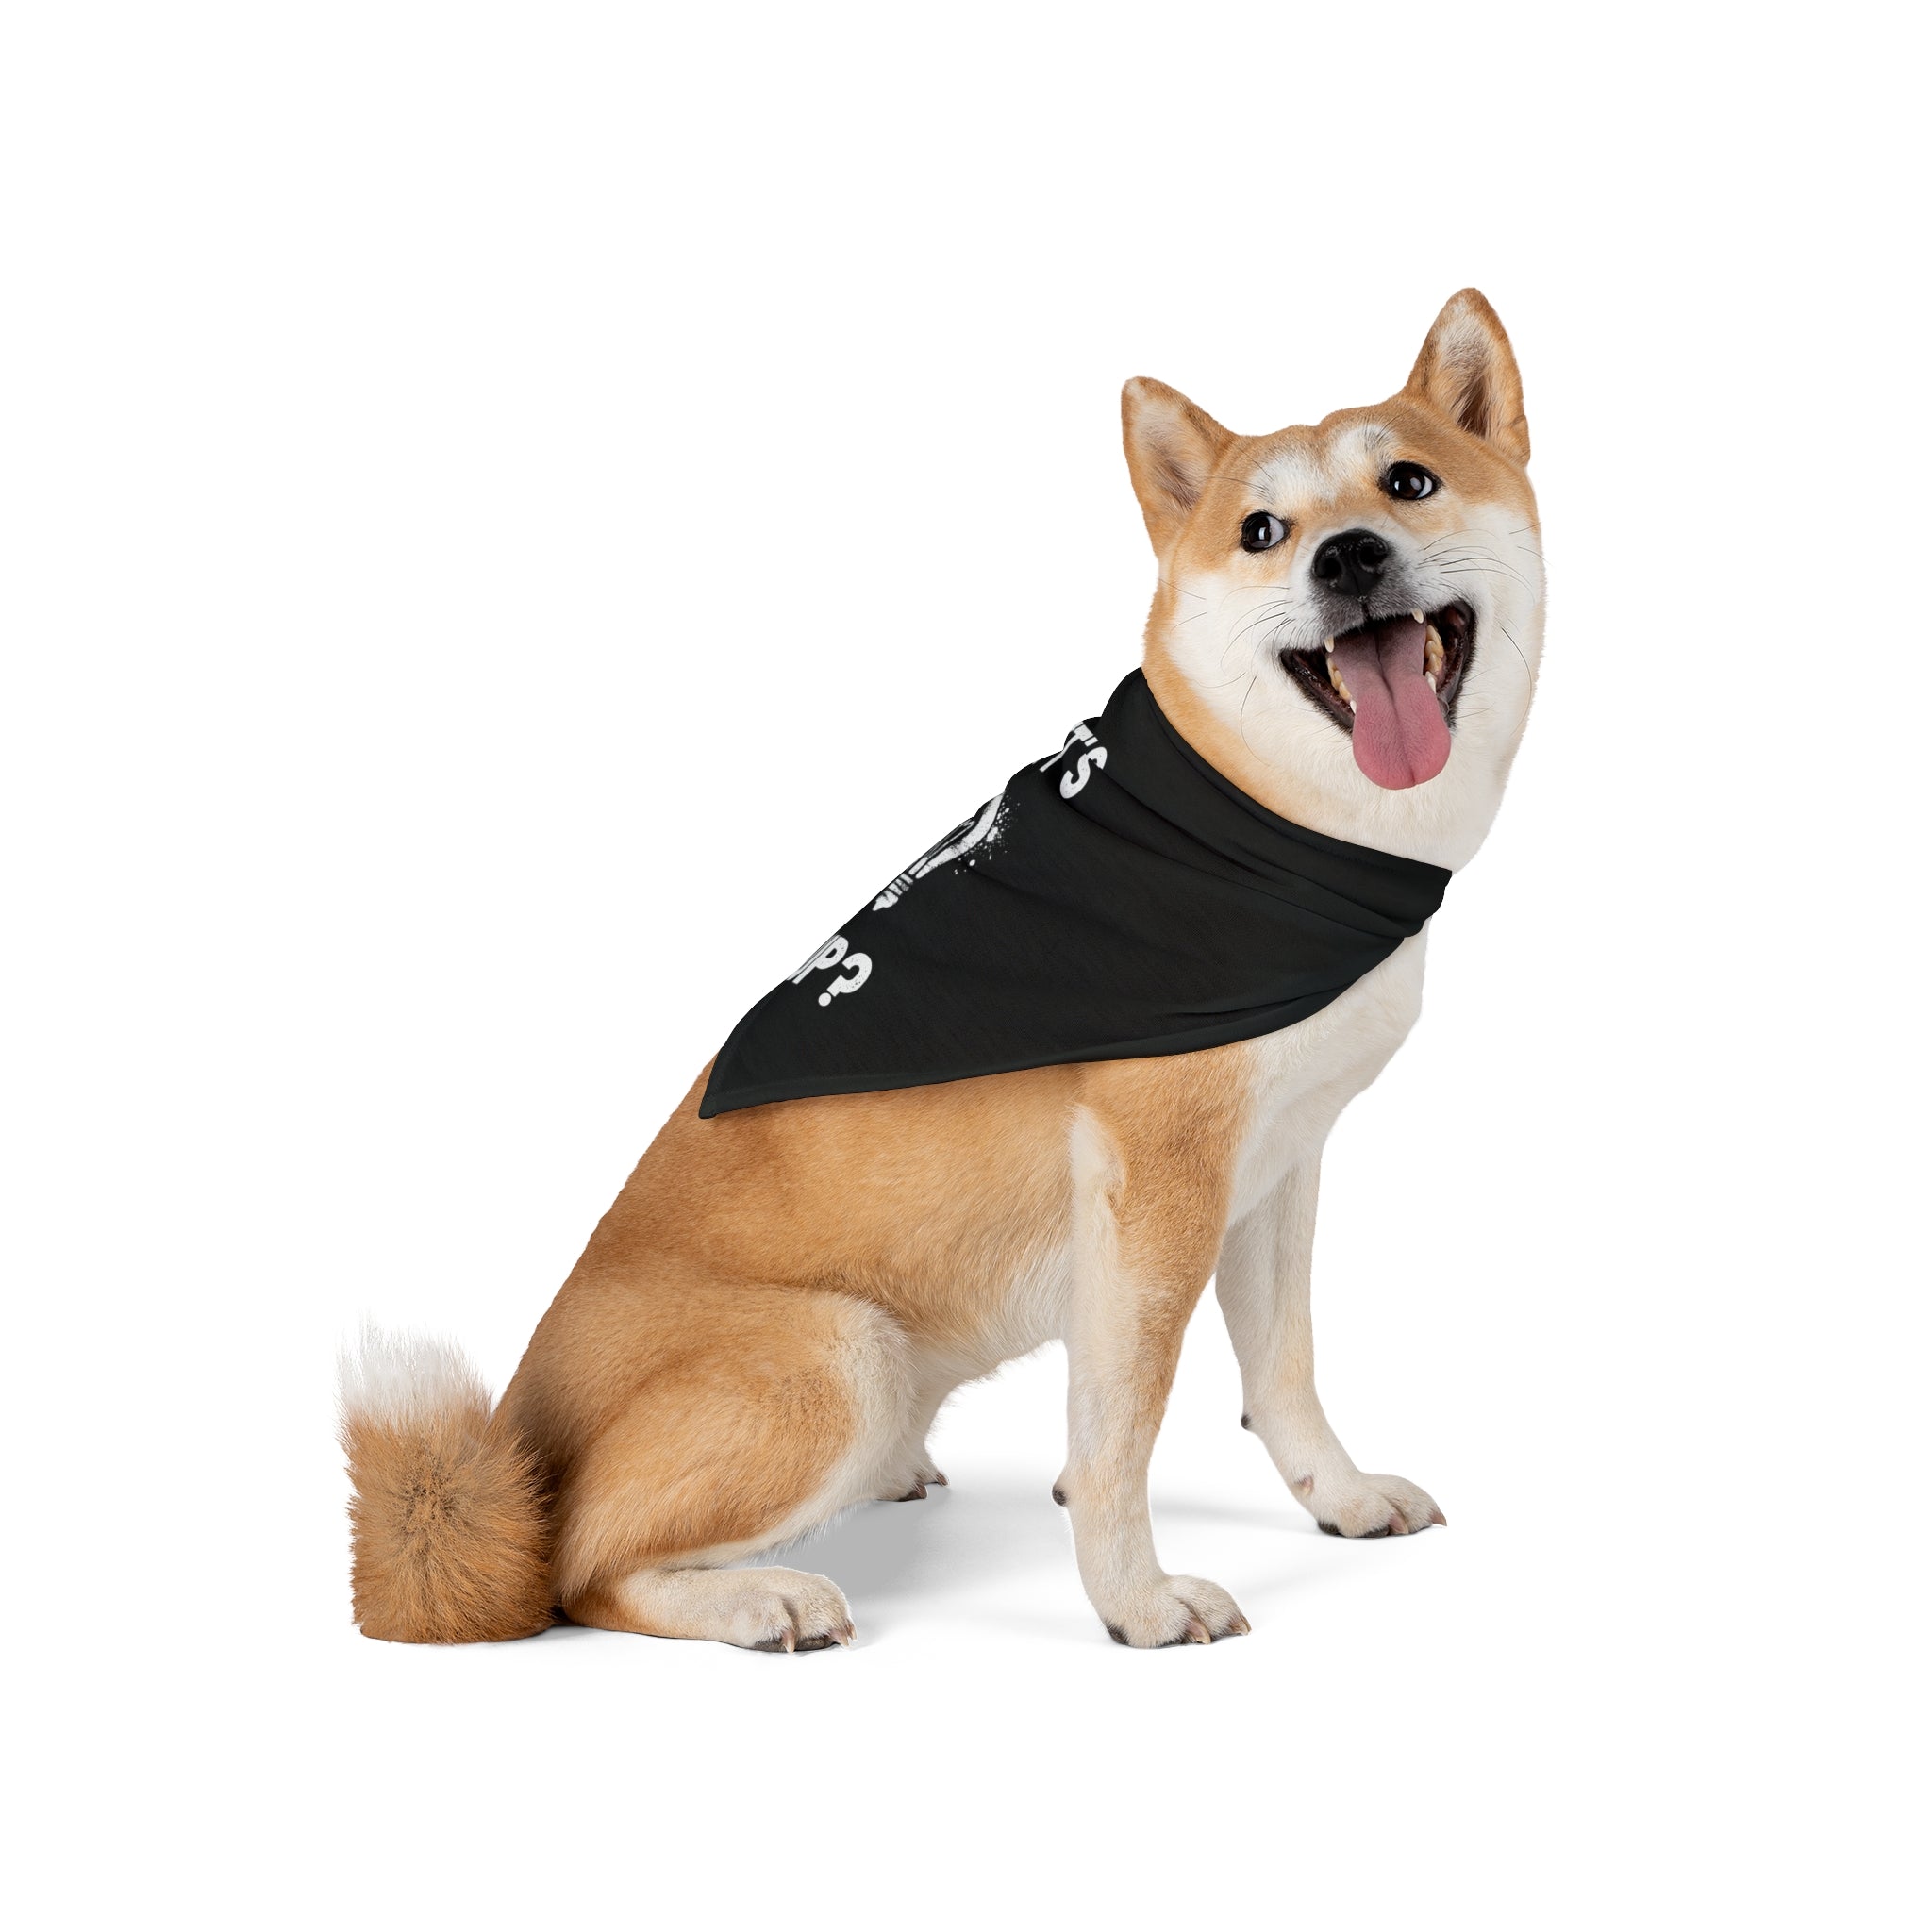 A Shiba Inu wearing a Watts Up - Pet Bandana sits on a white background, looking up with its tongue hanging out.